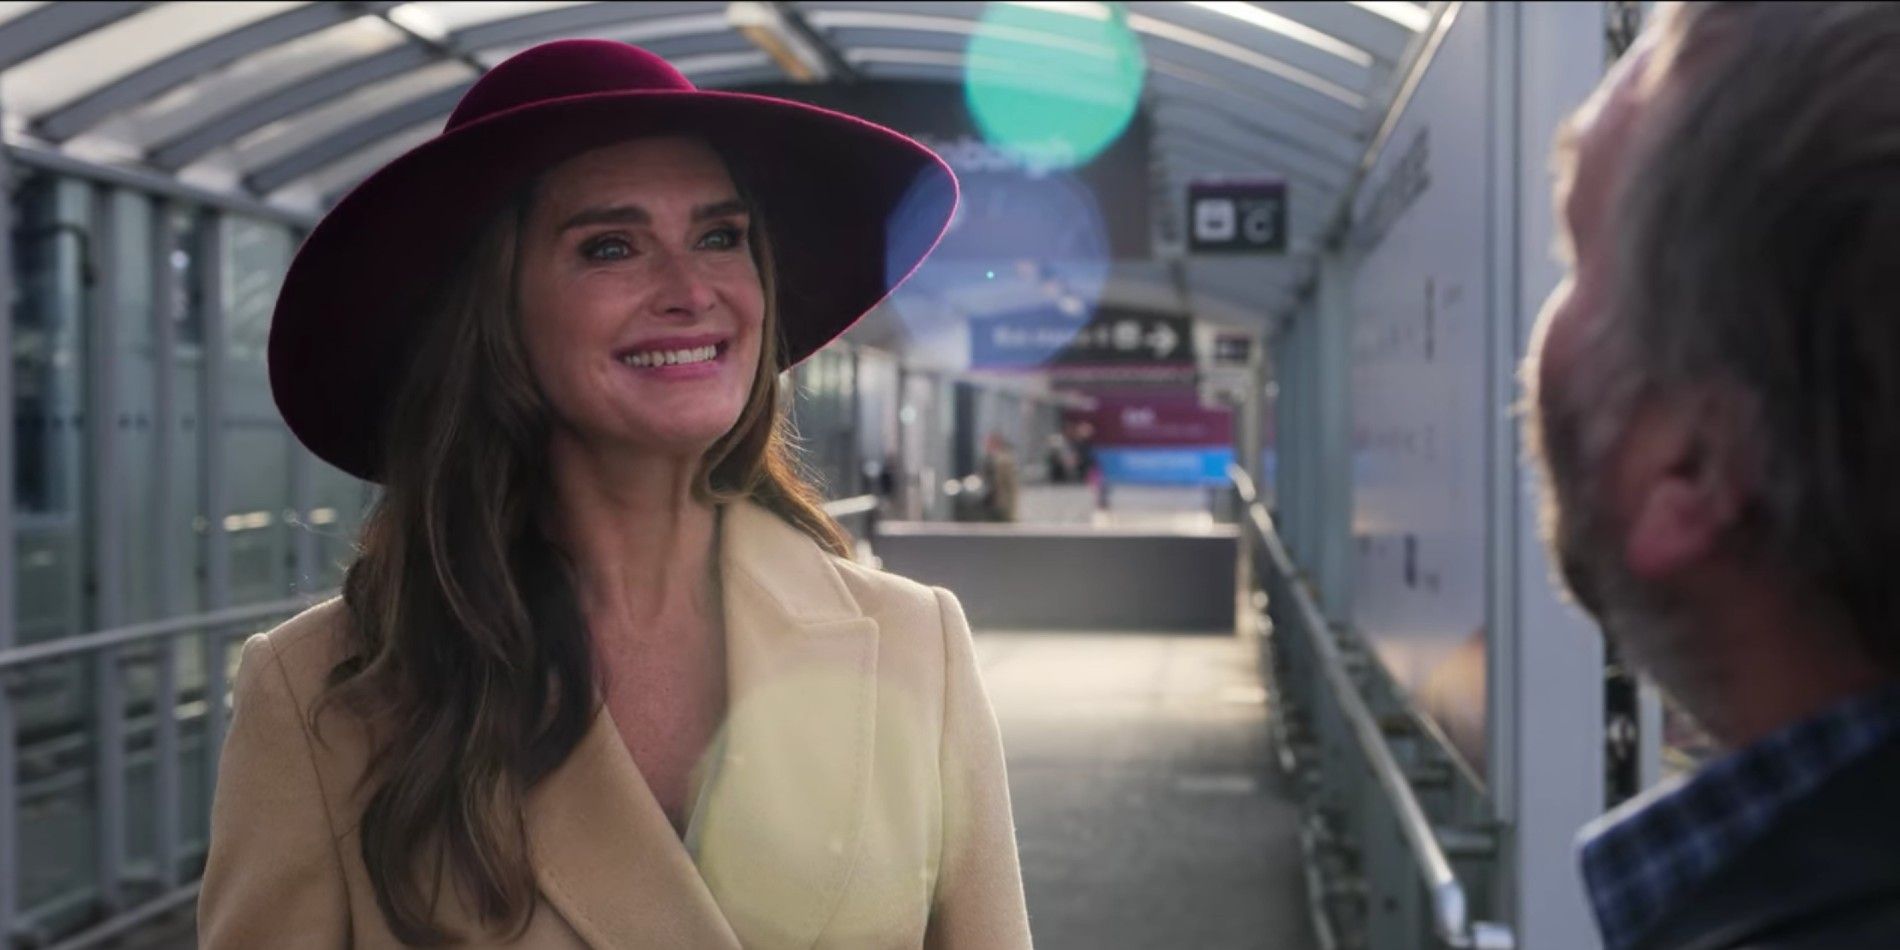 Brooke Shields New Netflix Movie Misfire Is More Upsetting After Her 3-Year-Old Rom-Com With 75% On RT